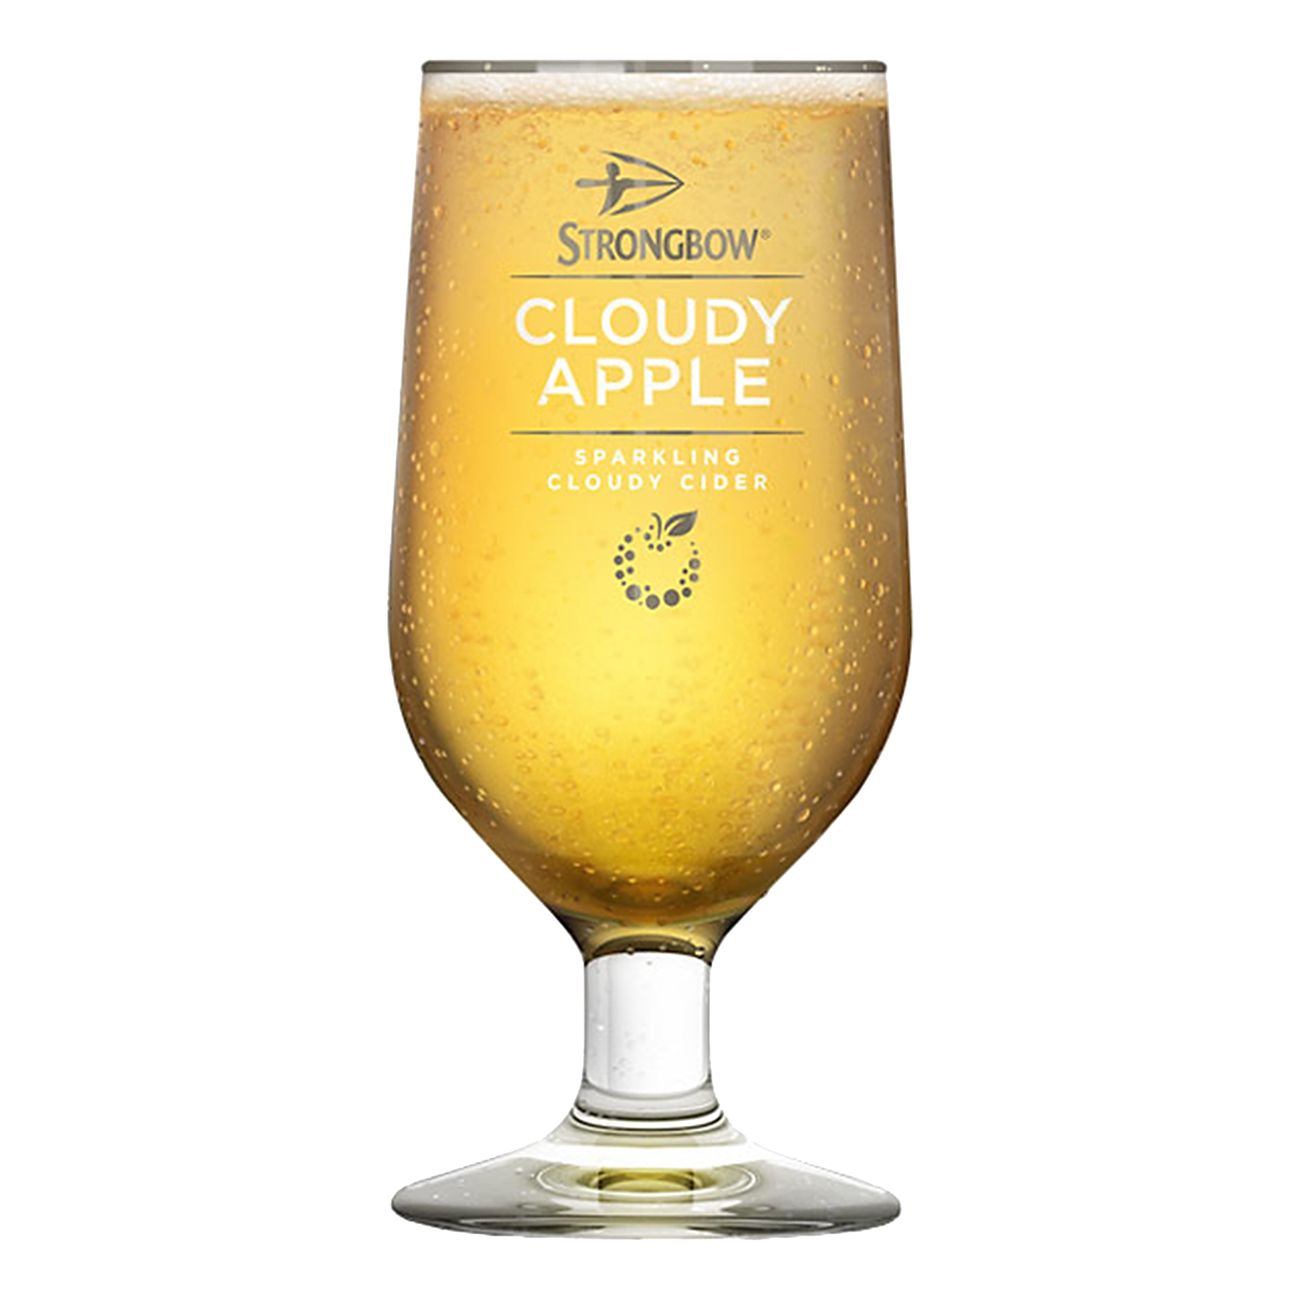 strongbow-cloudy-apple-ciderglas-89494-1